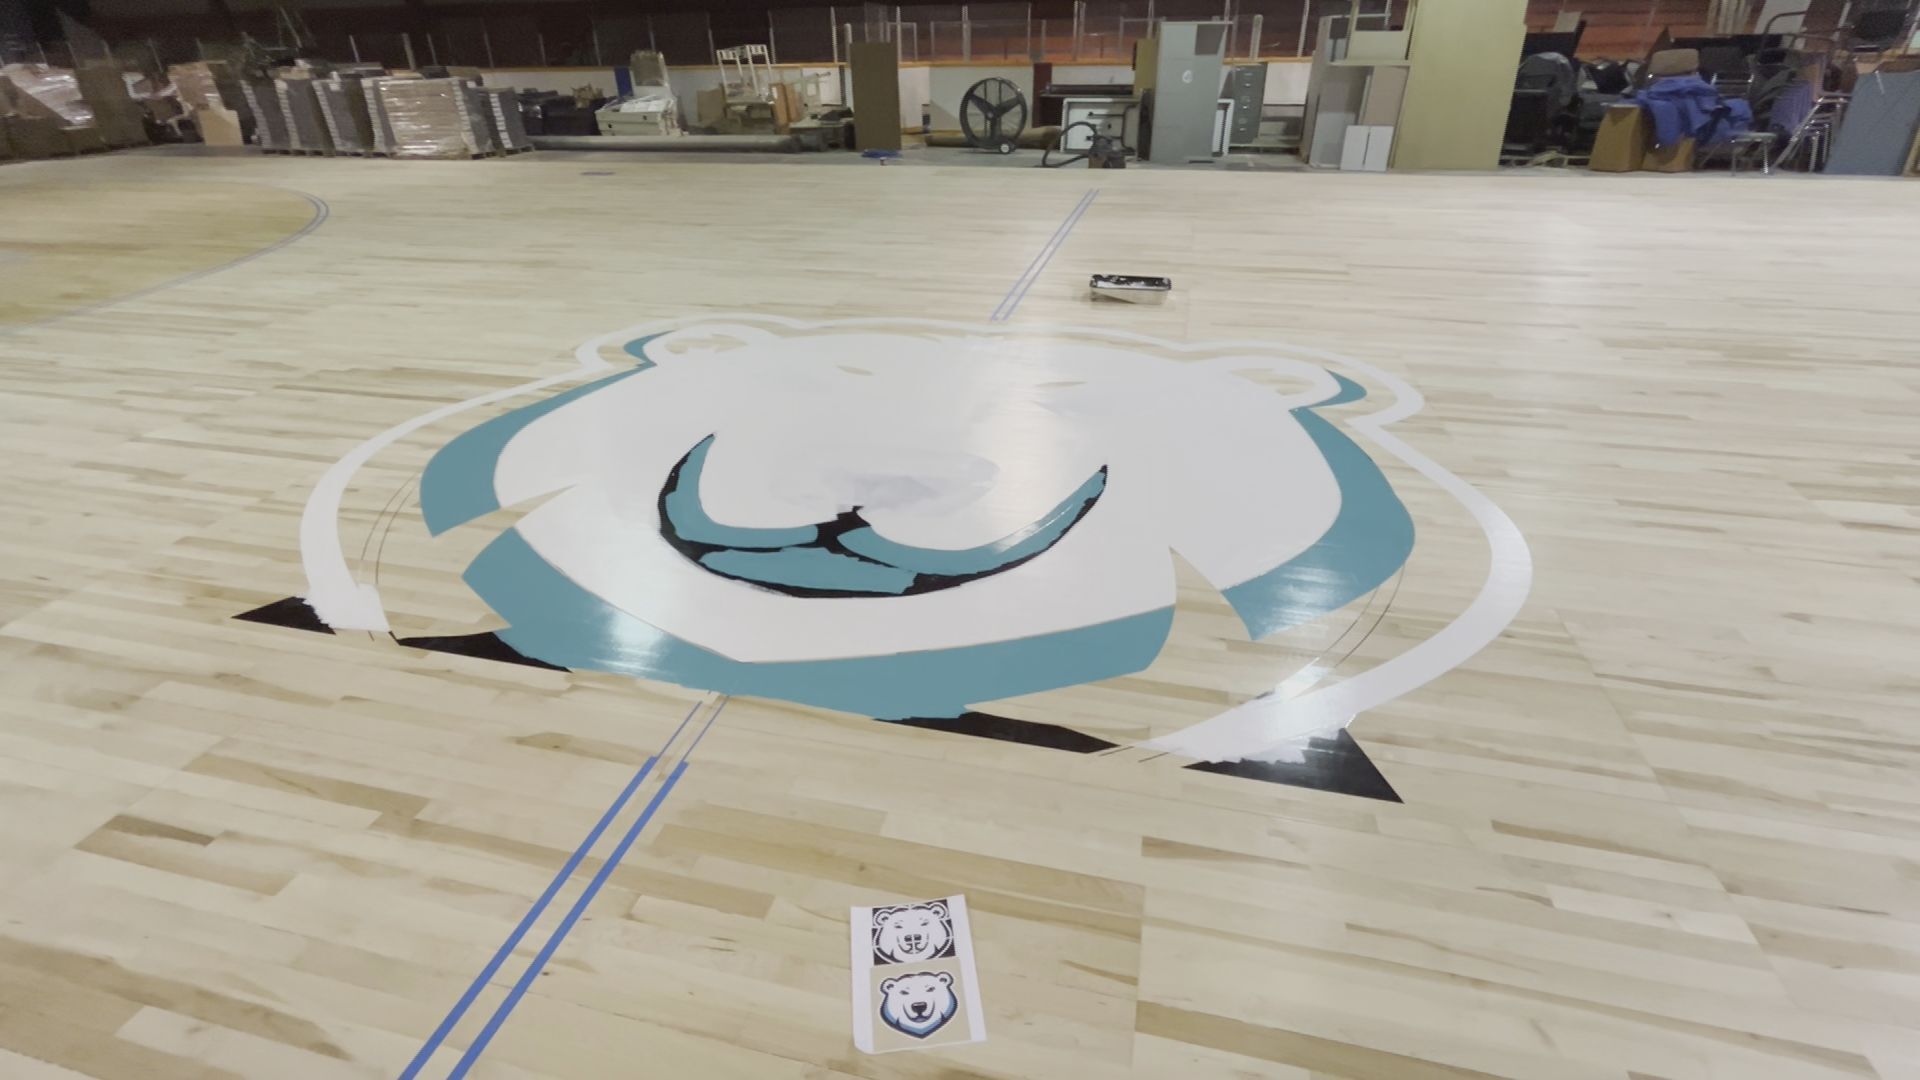 Basketball Manitoba and the Winnipeg Sea Bears welcome a new, world-class calibre court to Manitoba